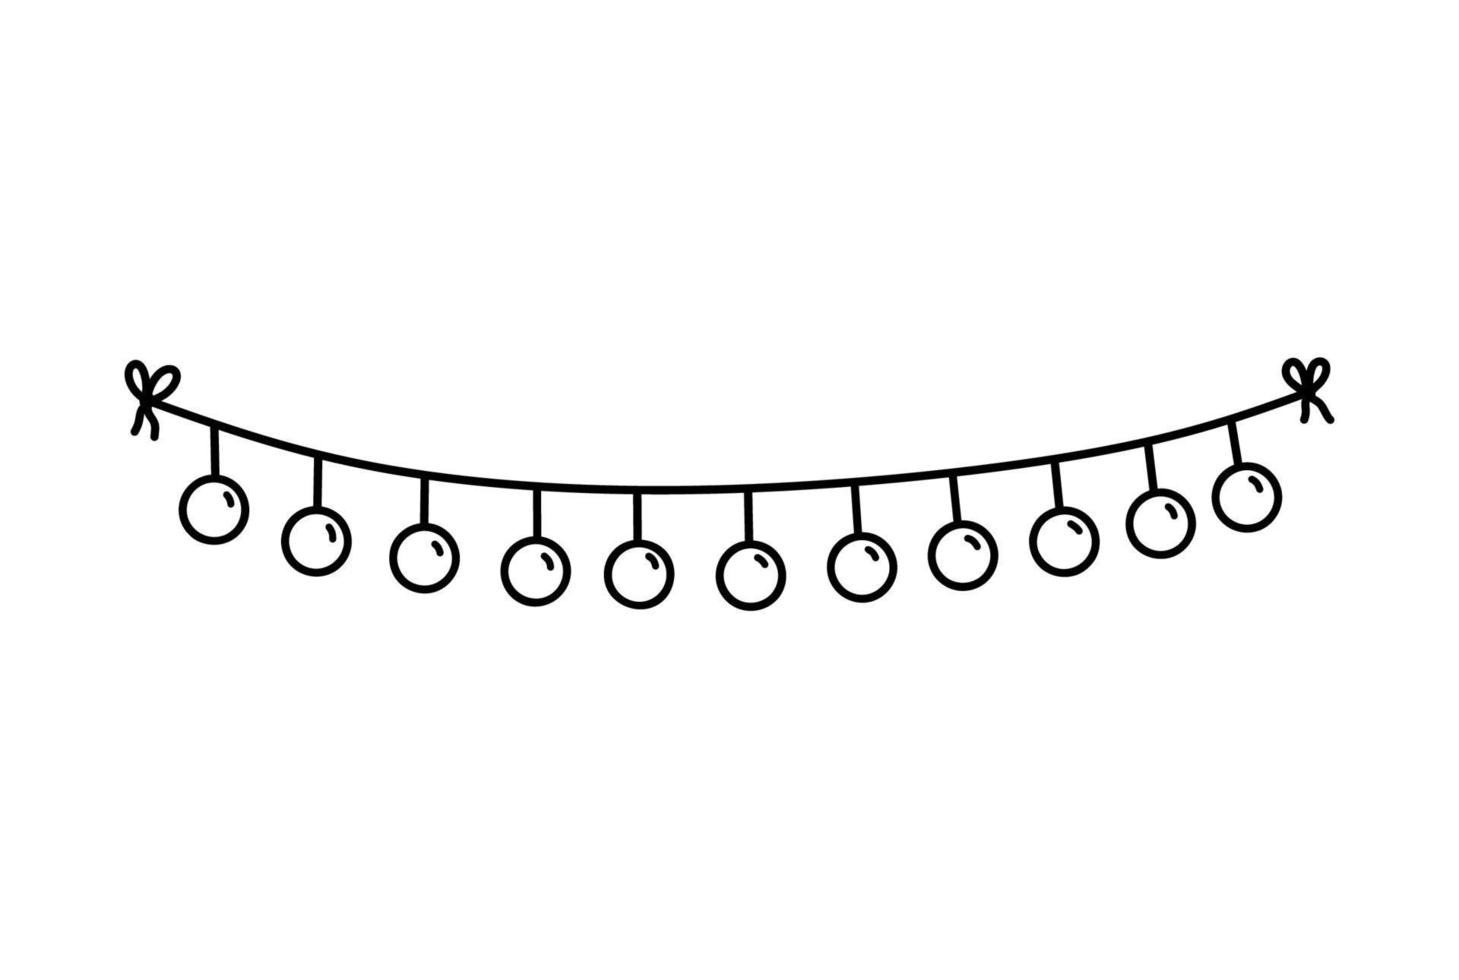 Cute festive garland for a party isolated on white background. Vector hand-drawn illustration in doodle style. Perfect for holiday designs, cards, decorations, logo.